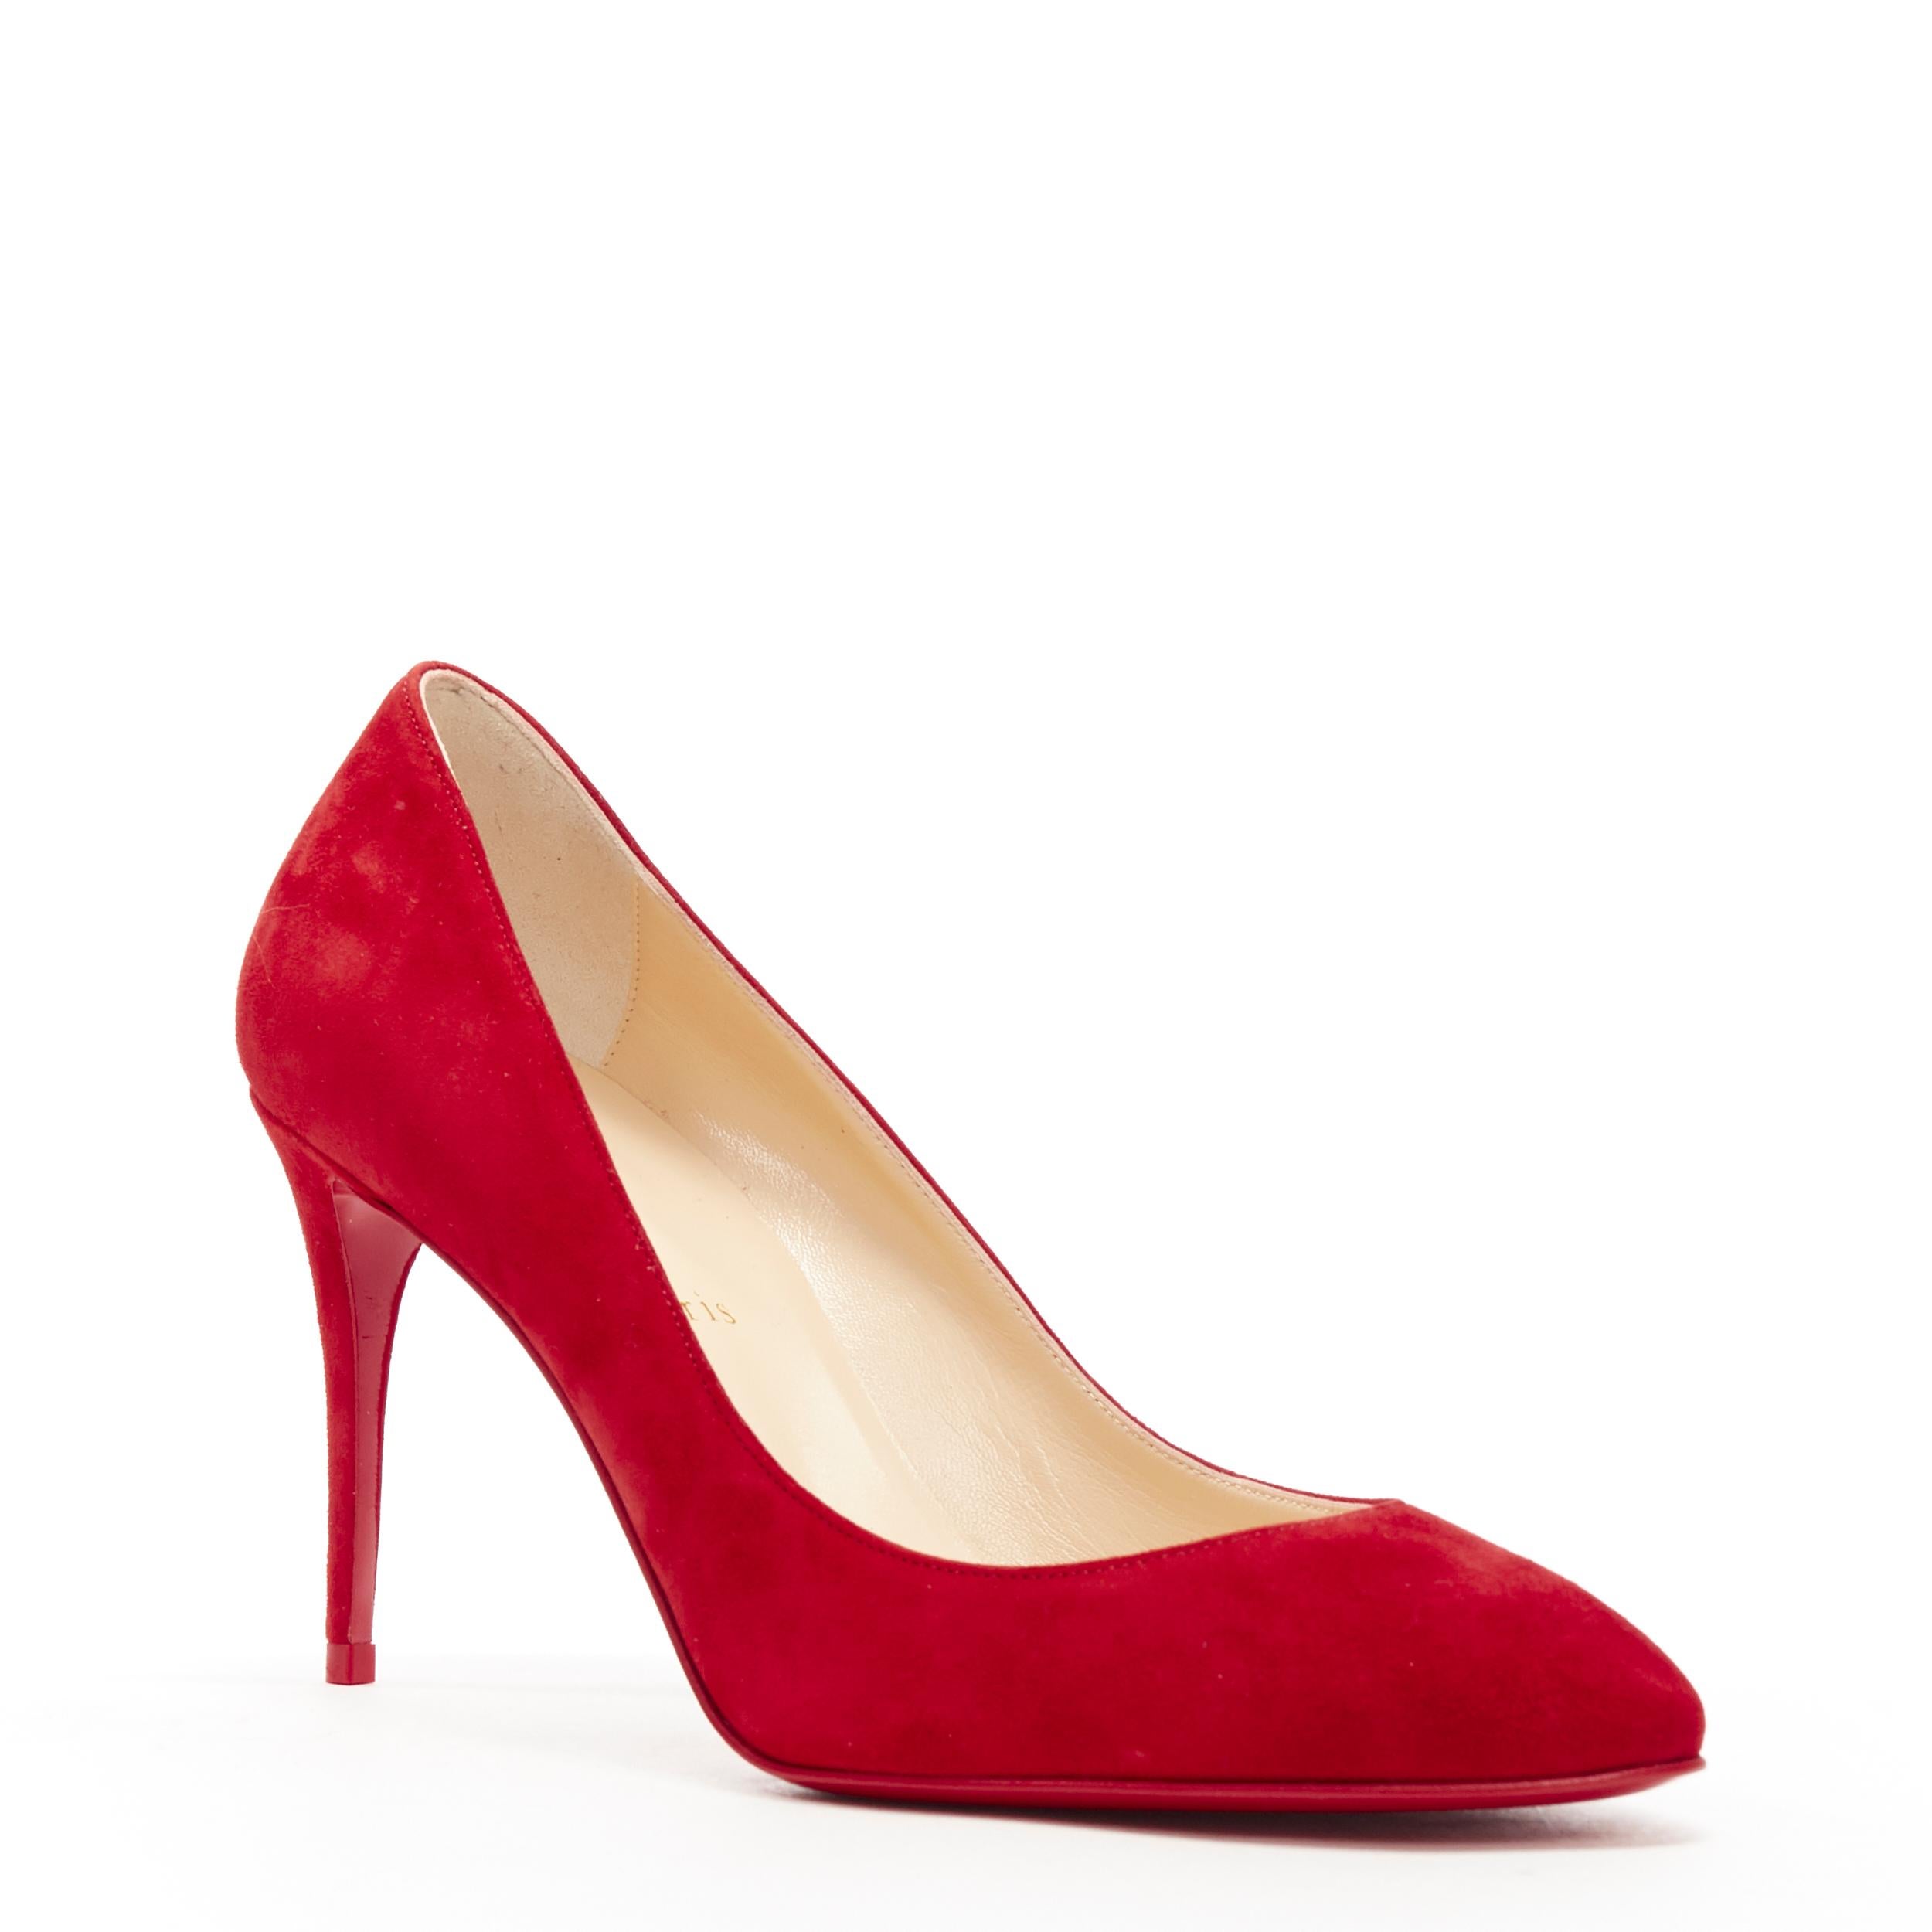 new CHRISTIAN LOUBOUTIN Eloise 85 Loubi red suede almond toe classic pump EU36
Brand: Christian Louboutin
Designer: Christian Louboutin
Model Name / Style: Eloise 85
Material: Suede
Color: Red
Pattern: Solid
Extra Detail: Style code: 3180614 High